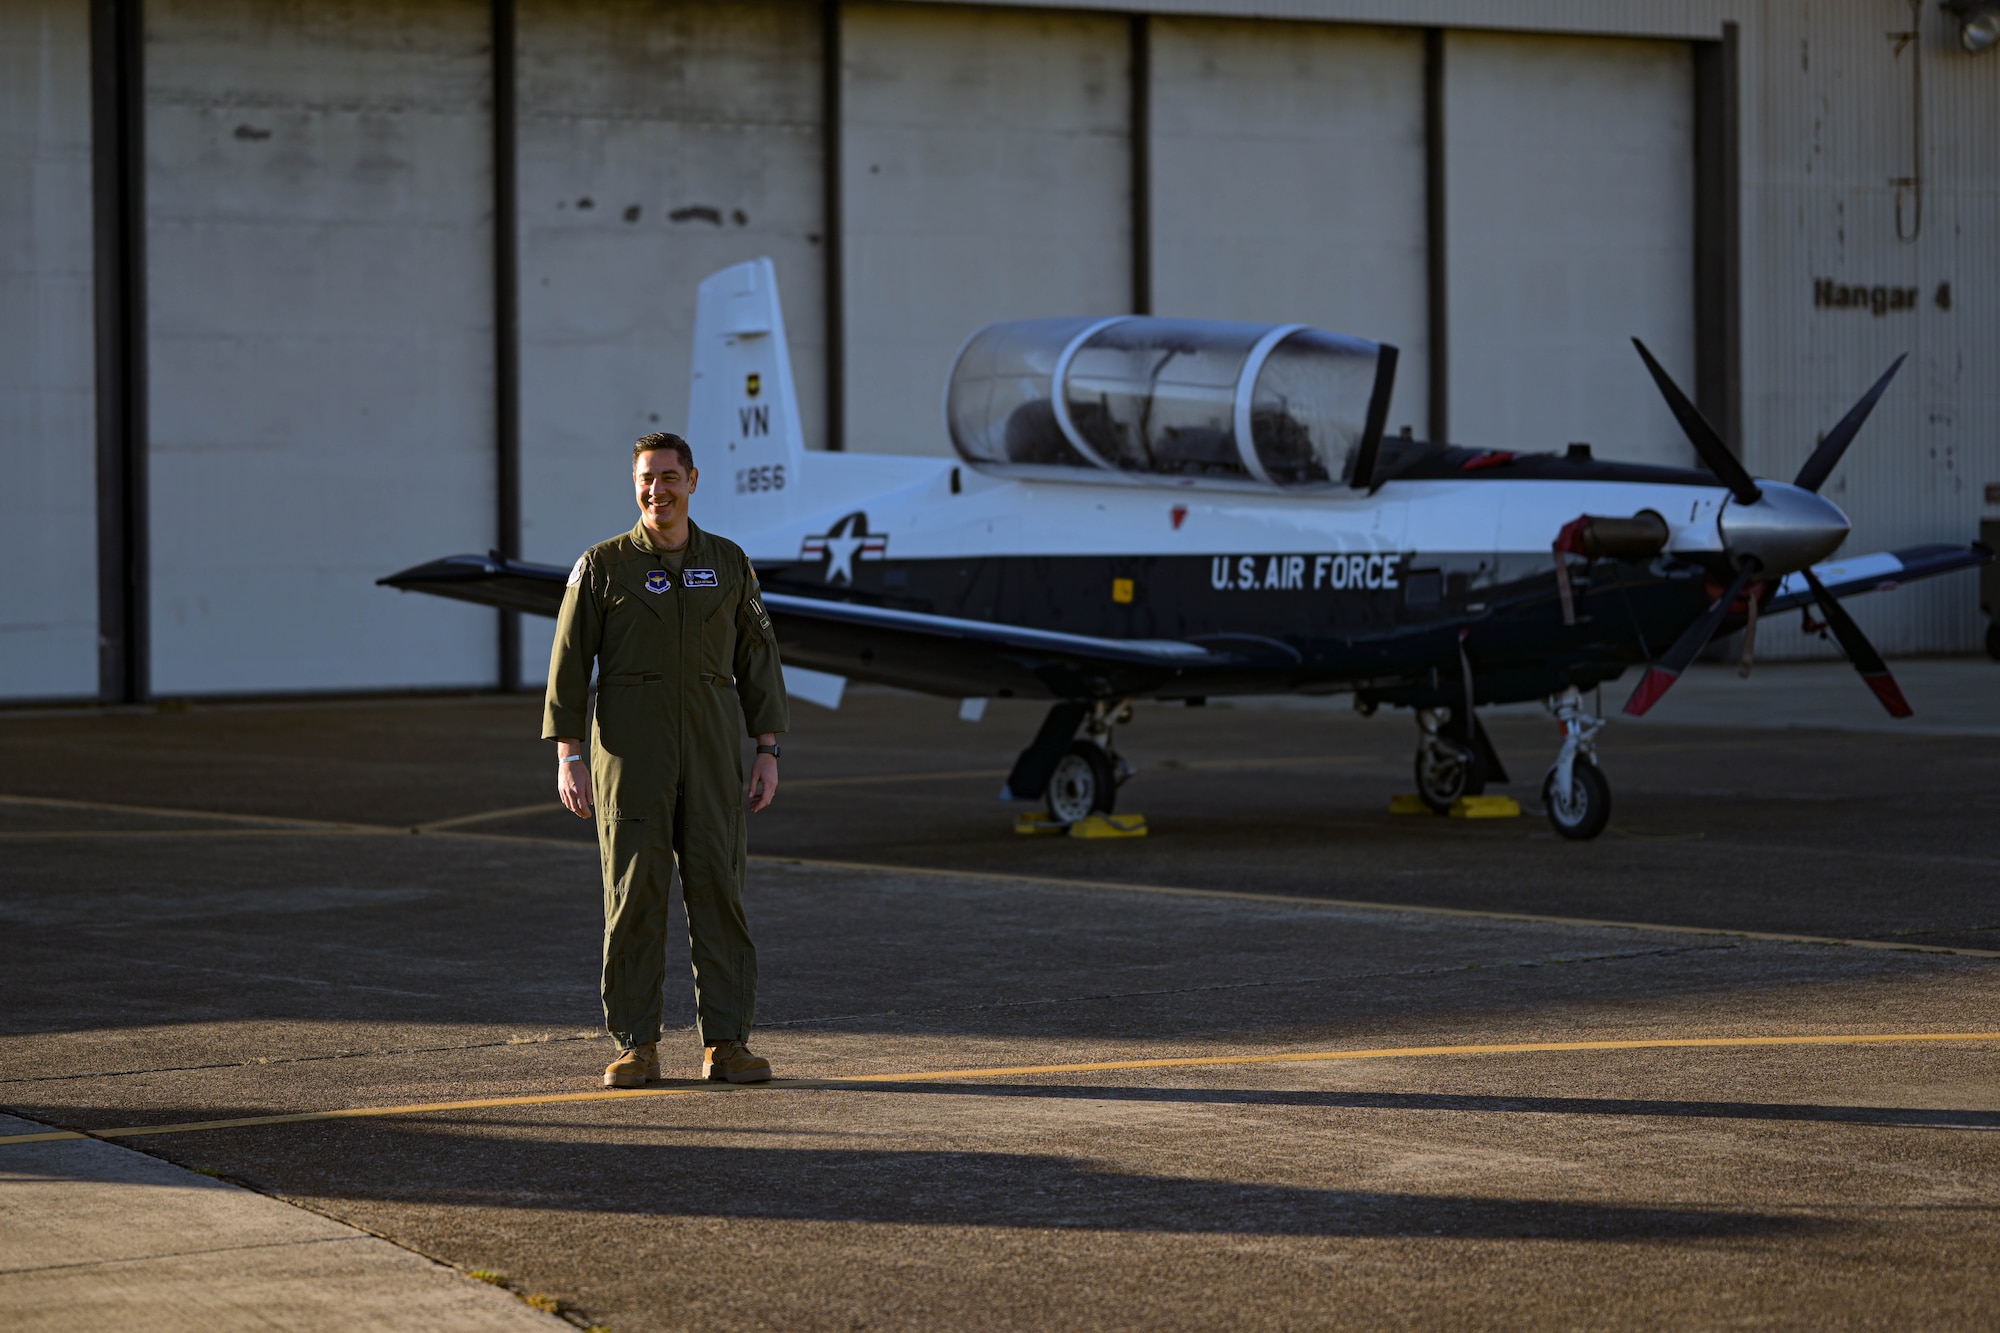 U.S. Air Force Col. Alexander Heyman, 14th Flying Training Wing Operations Group commander, stands in front of a T-6A Texan II visiting from Vance Air Force Base in the maintenance quadrant, September 30, 2022, on Columbus AFB, Miss. The T-6, tail number 856, was visiting Columbus AFB for a new paint job before returning to Vance. (U.S. Air Force photo by Staff Sgt. Jake Jacobsen)